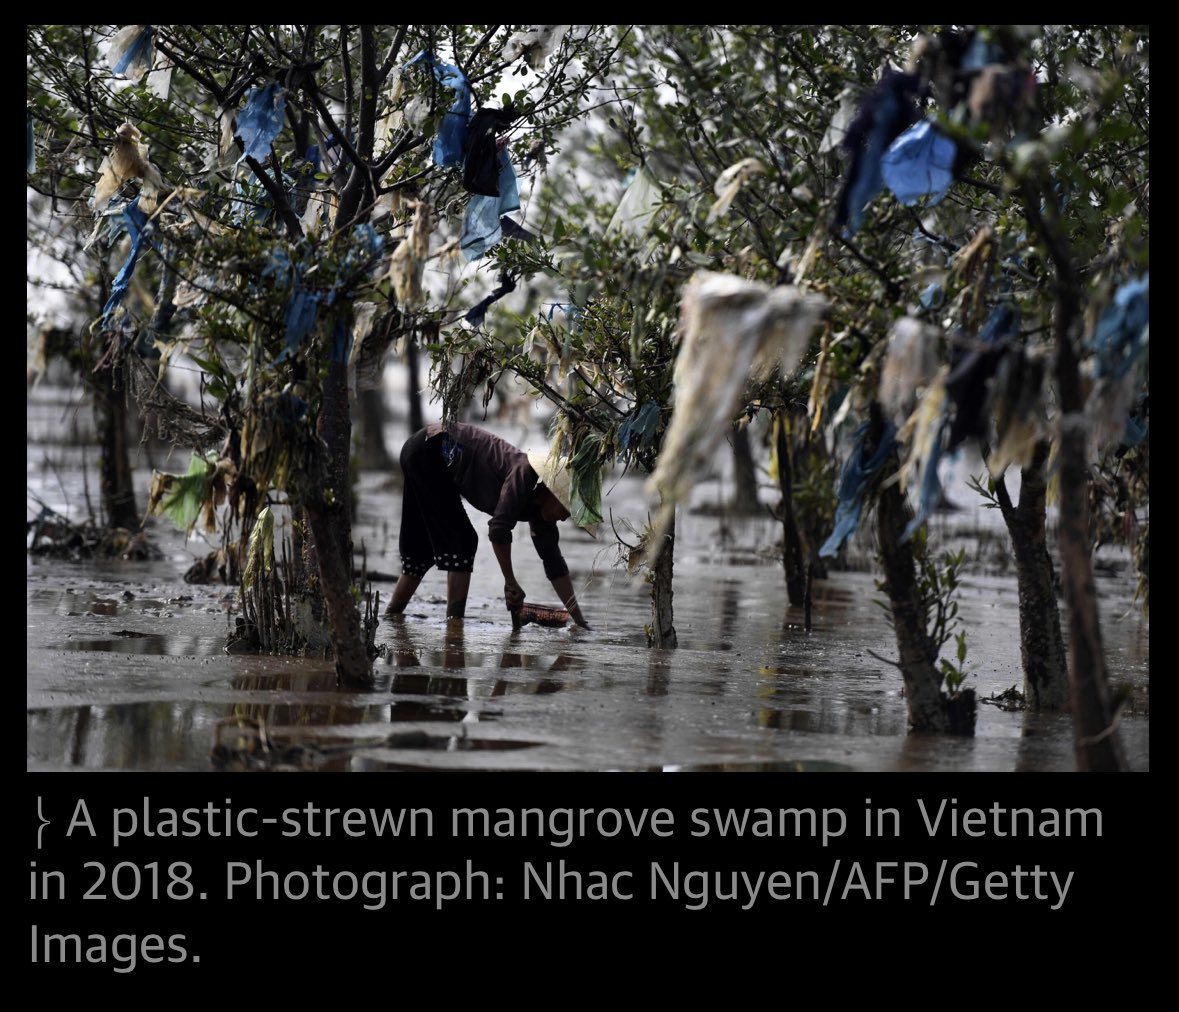 France has made plastic waste an urgent priority. Researchers have discovered plastic munching bacteria and are evolving them in the lab to supercharge The creation of enzymes that break the plastic down. I’m posting the article from the Guardian in the thread. By 2025 all